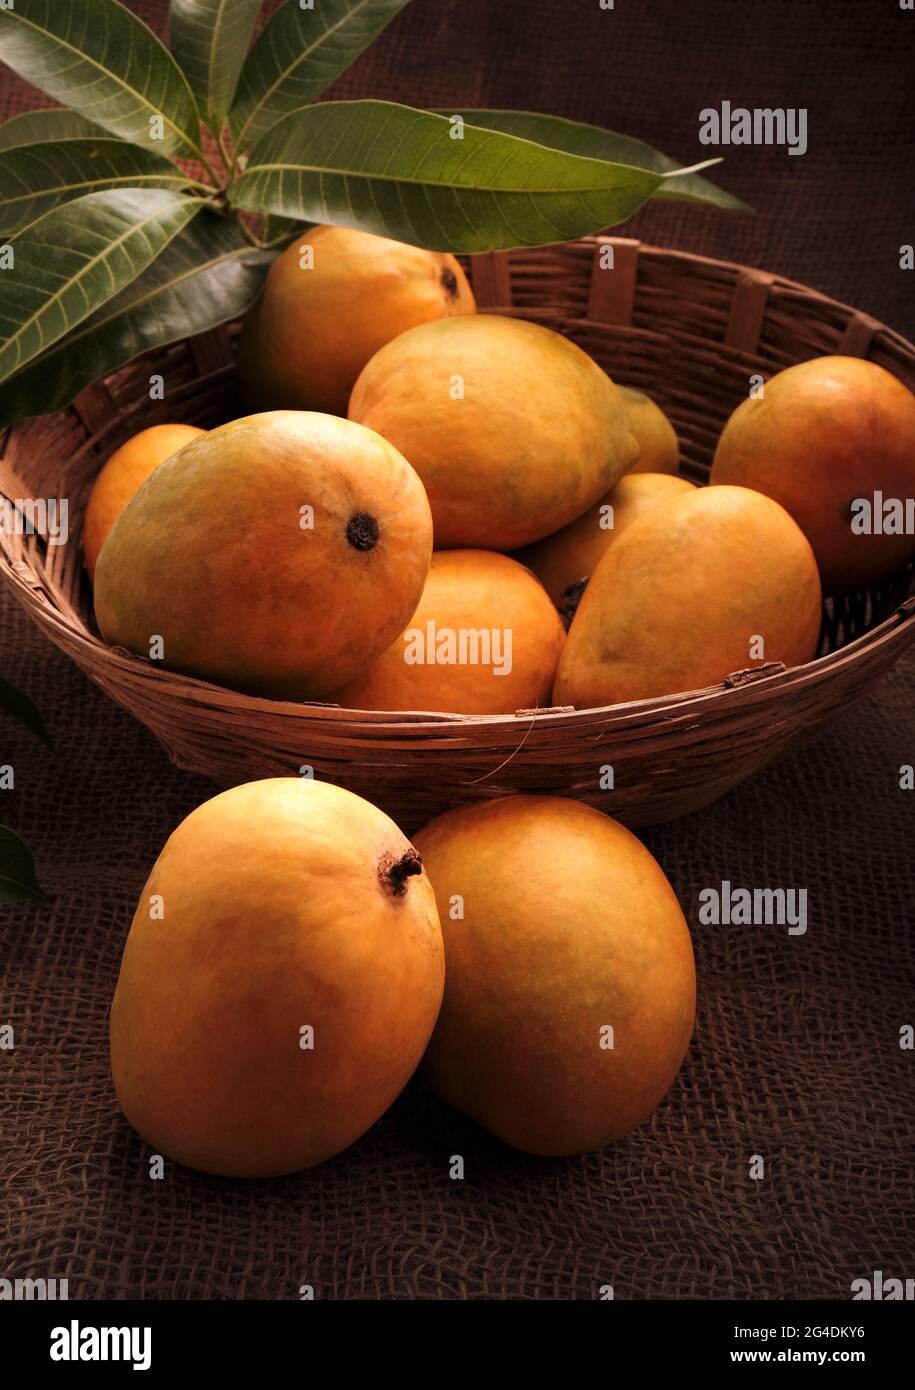 Mango fruits in wooden basket with leaf after harvest from farm, Mango fruits with leaf on Jute background. Stock Photo